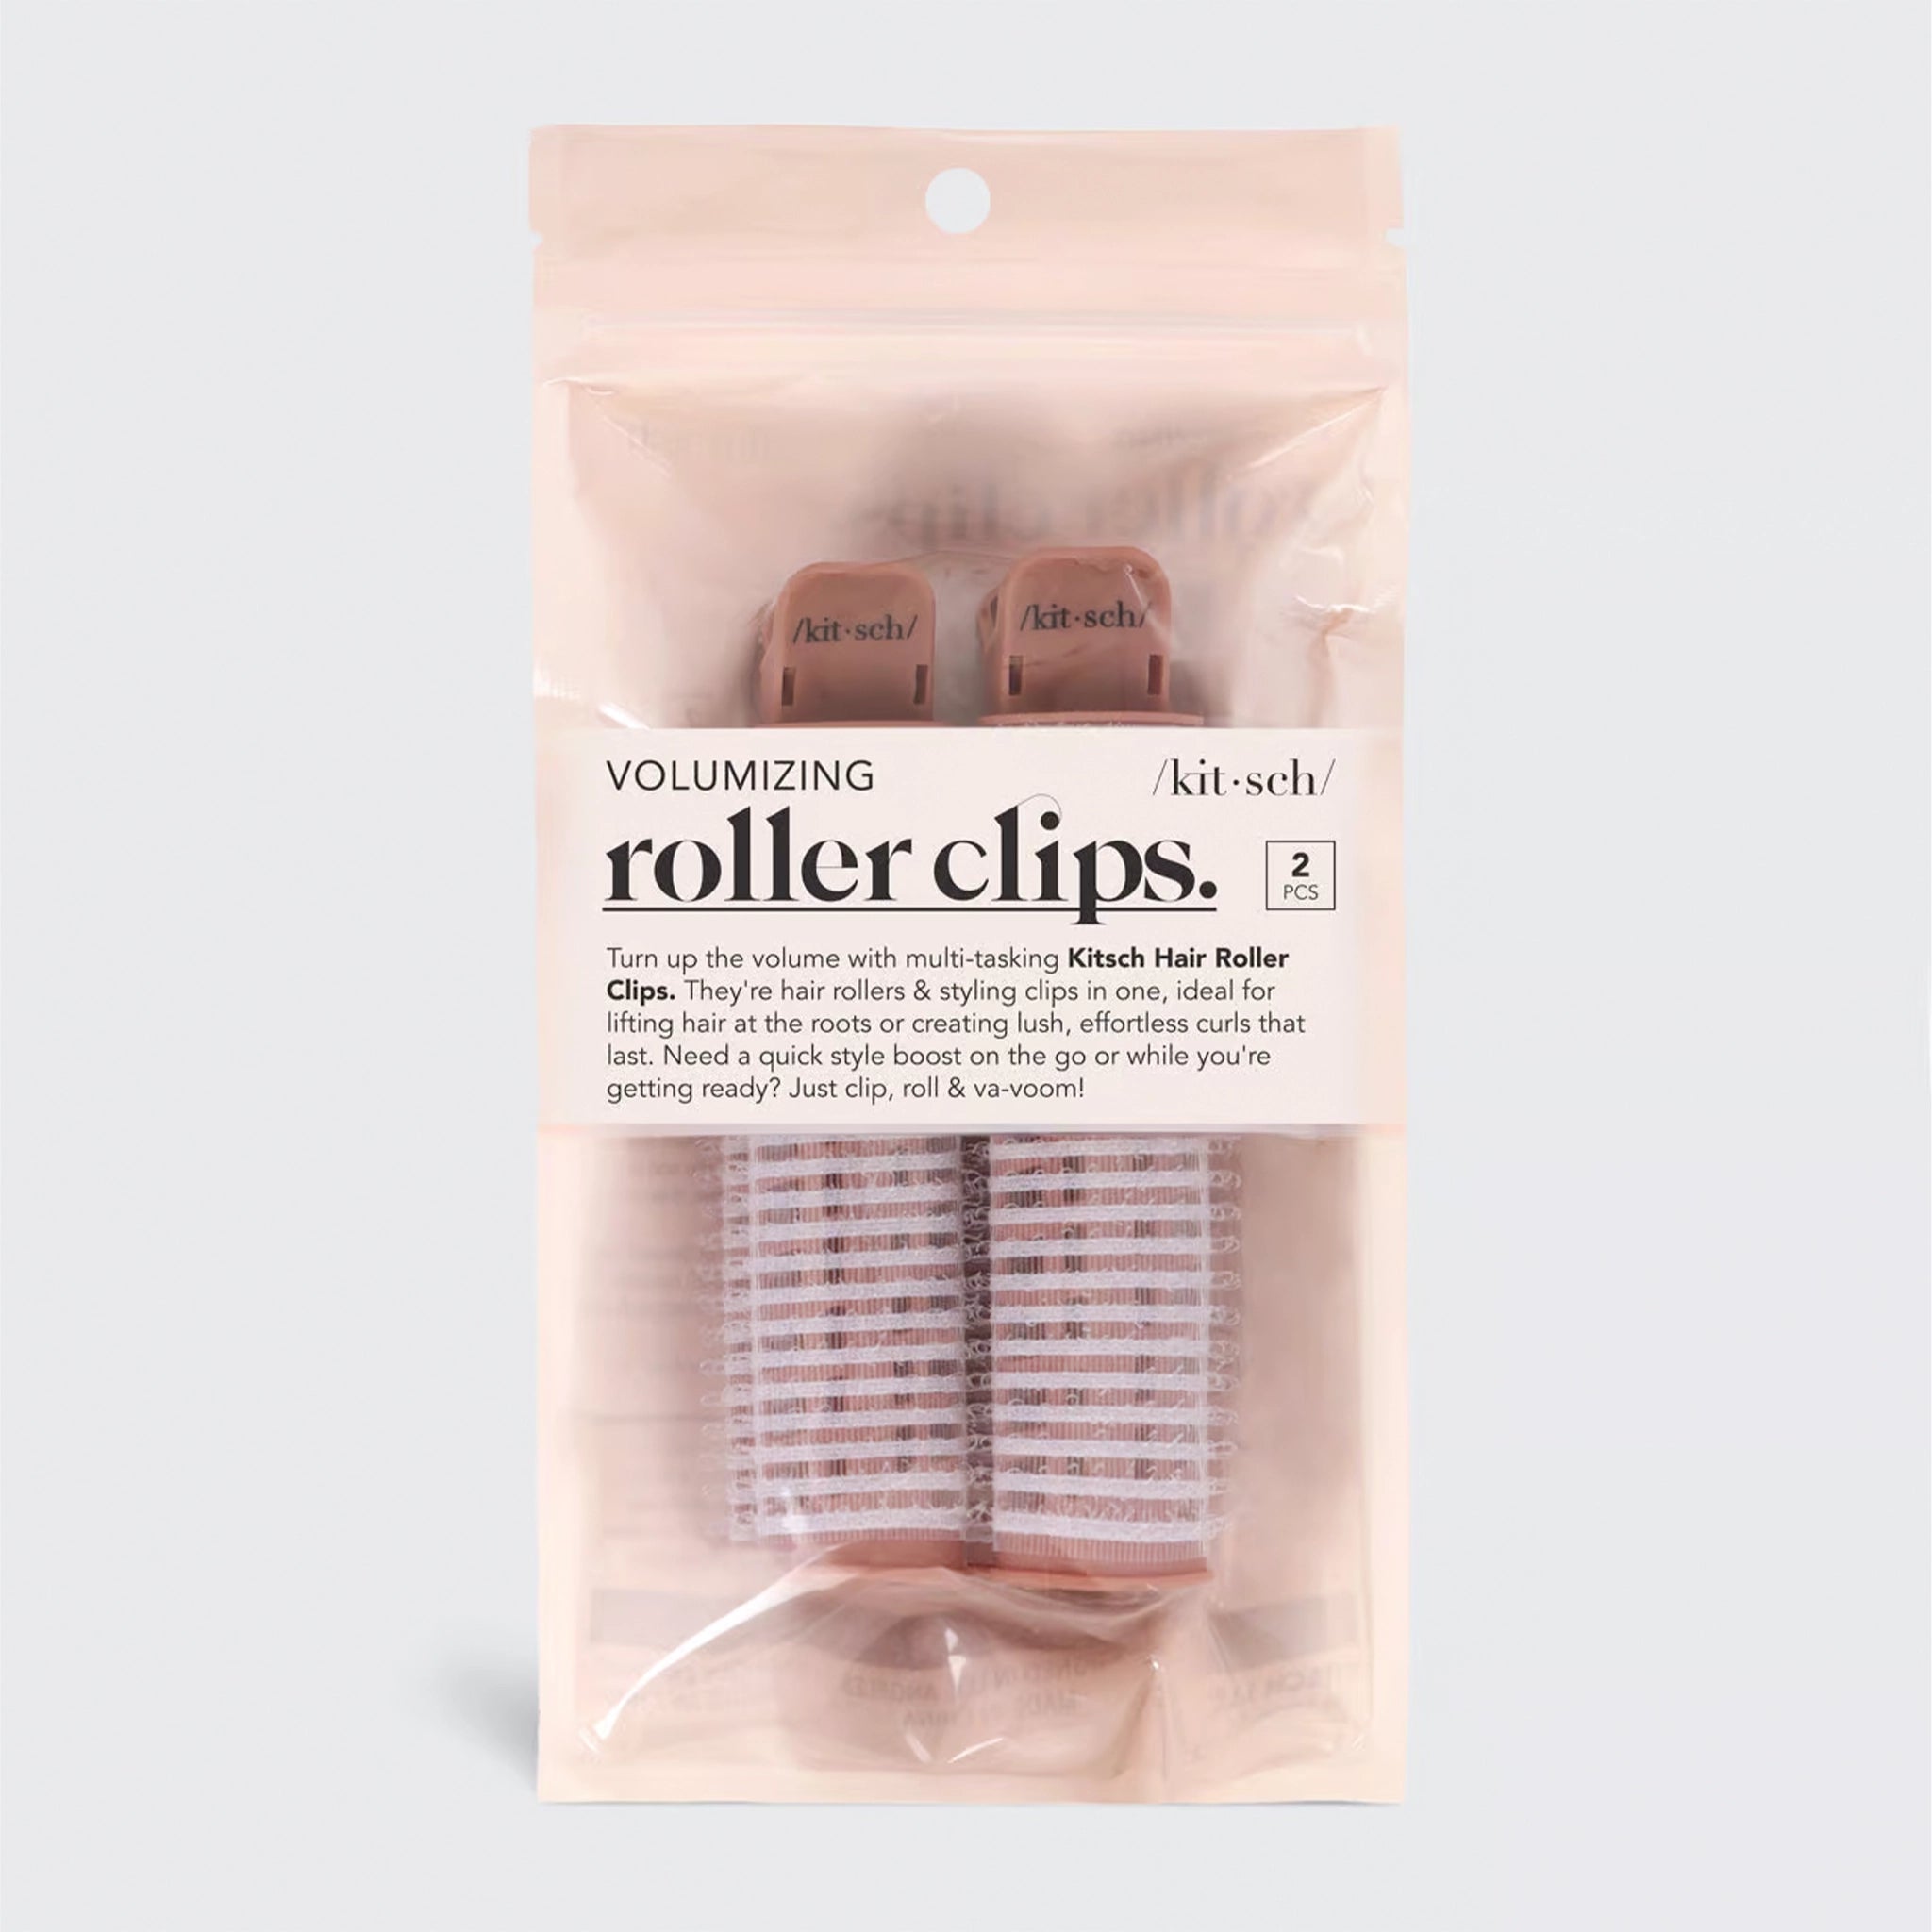 On a white background is a set of volumizing roller clips in their pink packaging. 